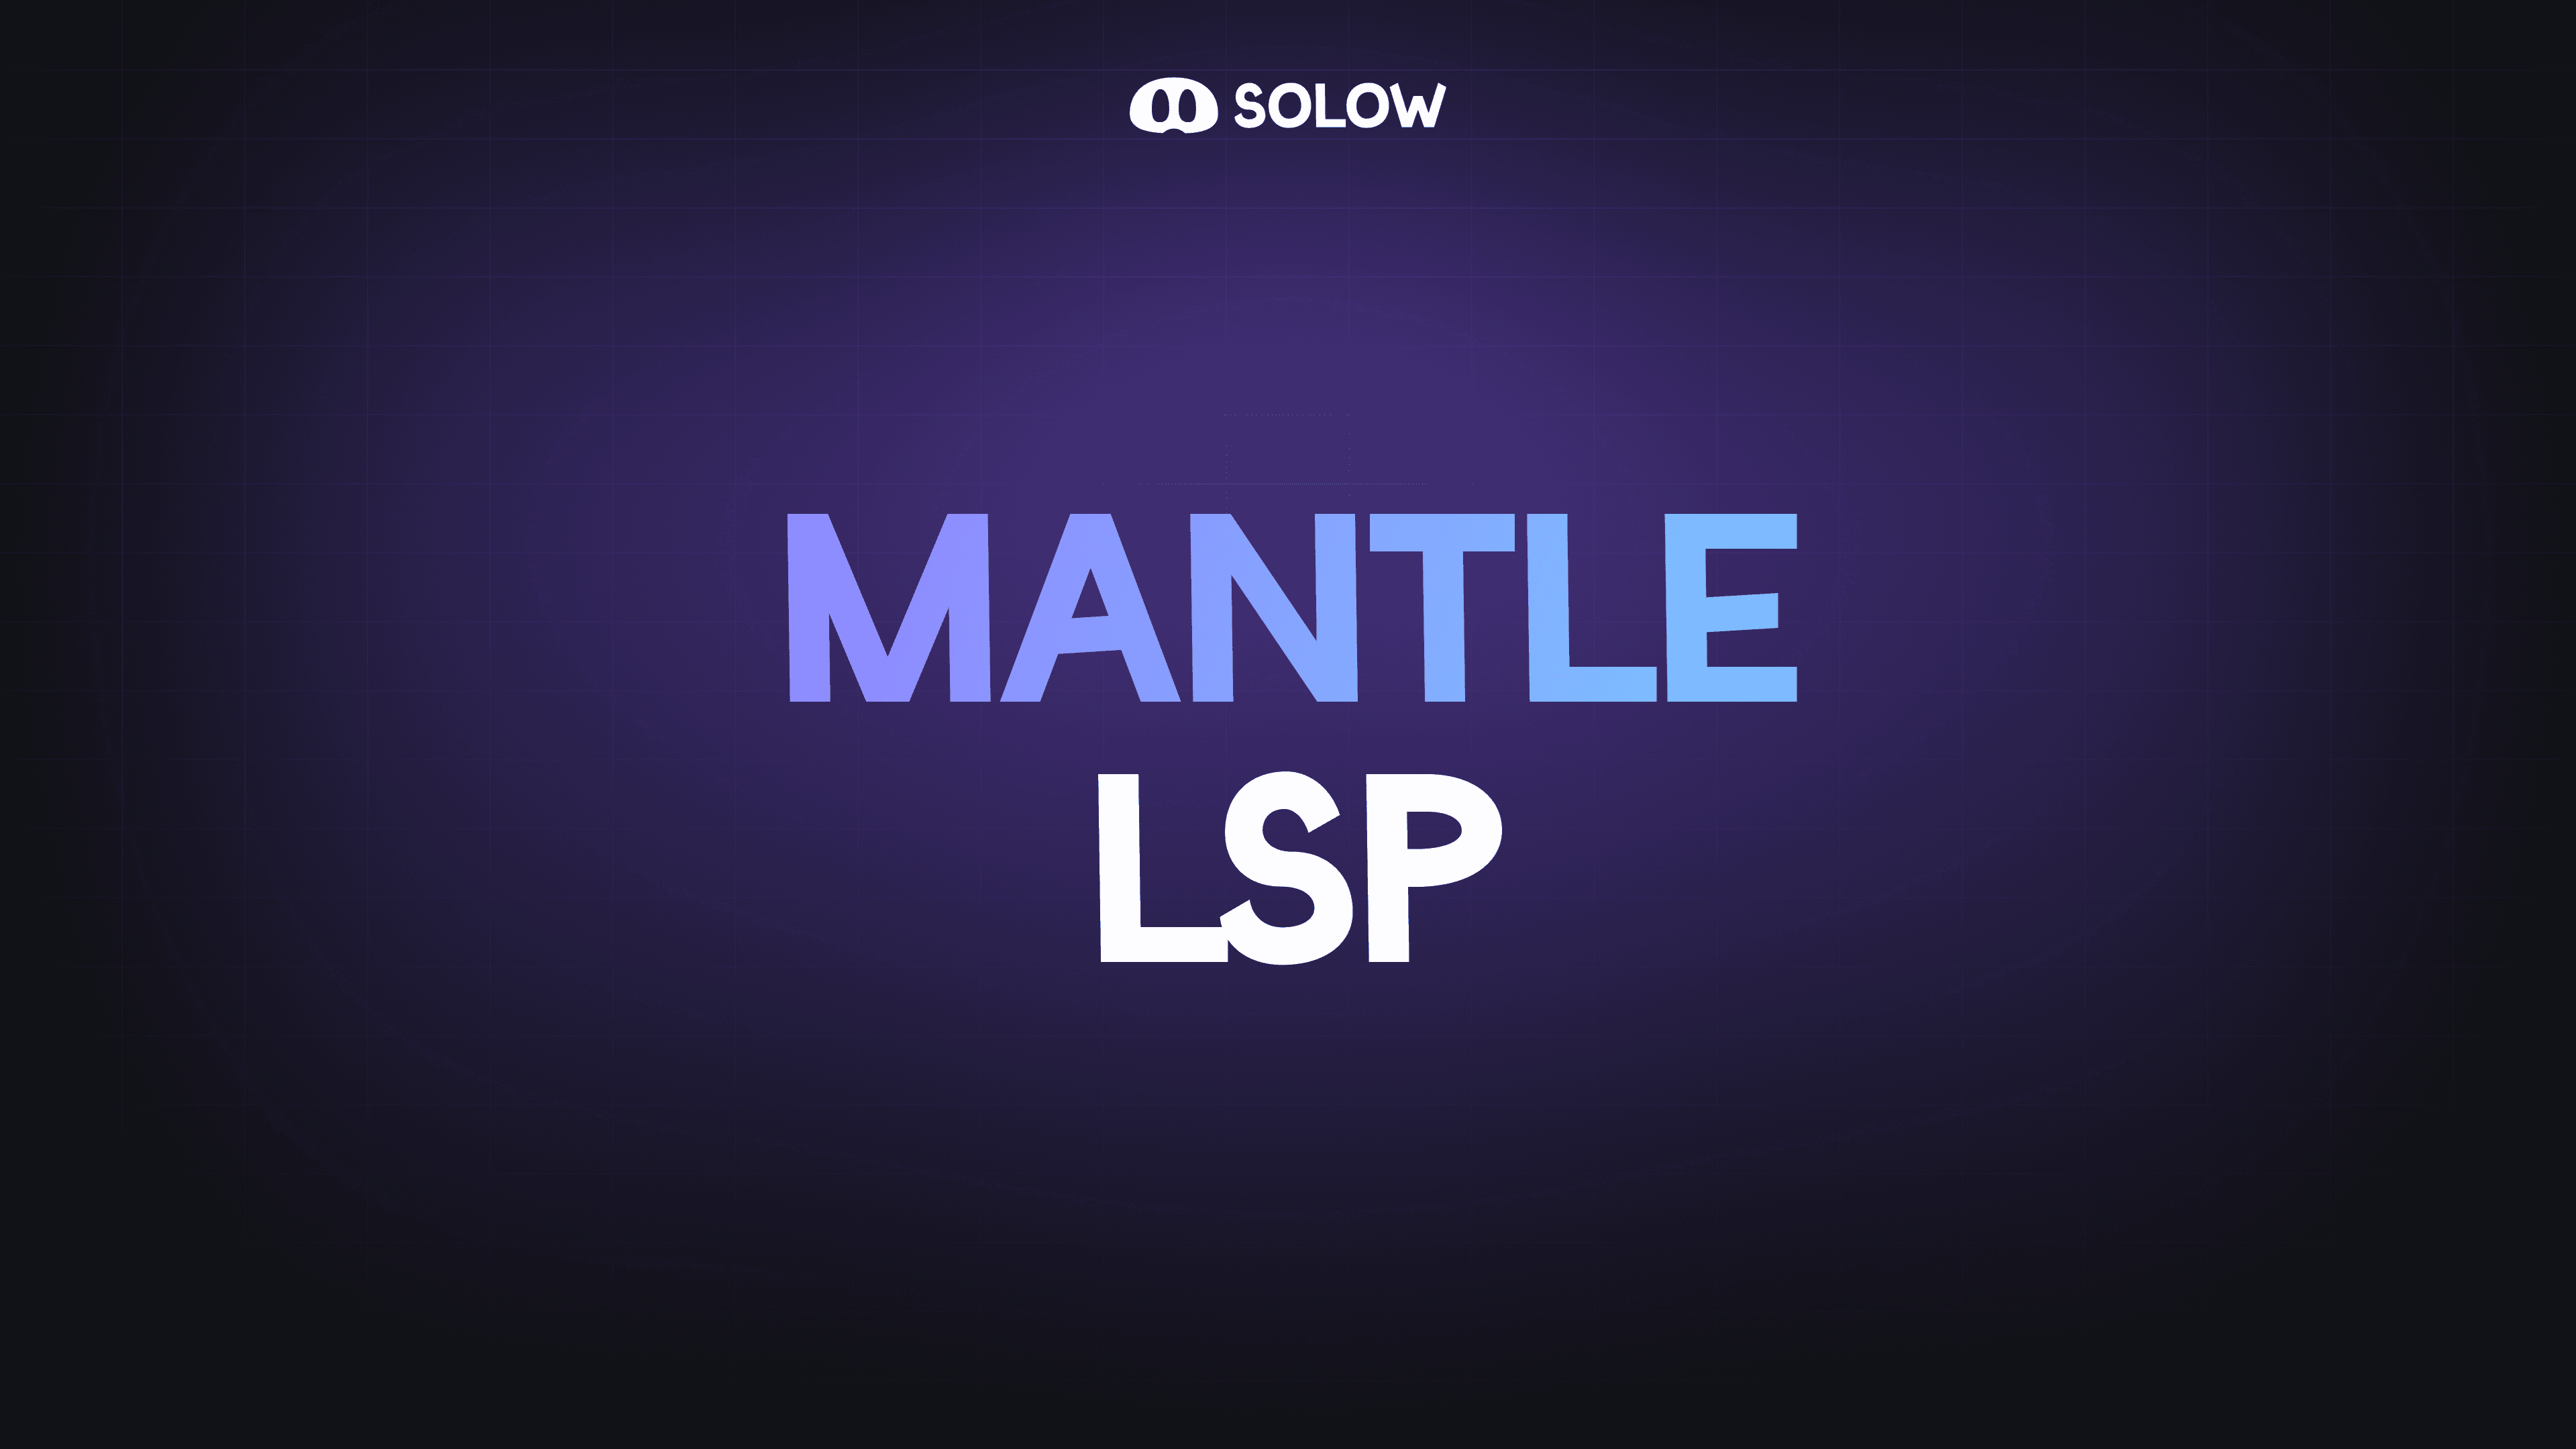 Mantle LSP (Liquid Staking Protocol)